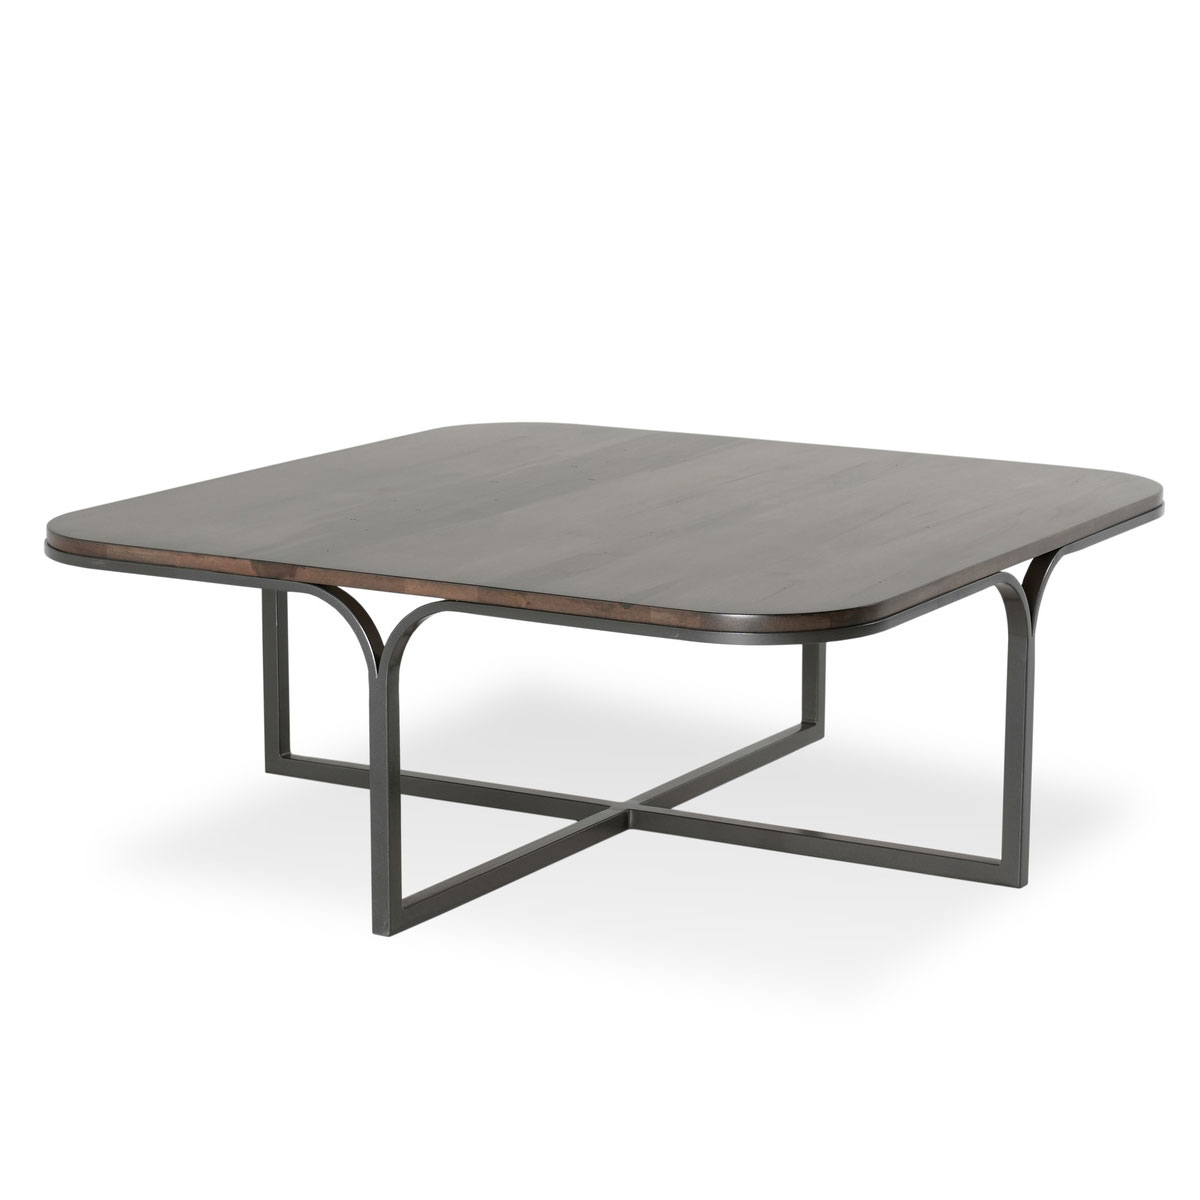 Charleston Forge Wave 54 inch Square Cocktail Table